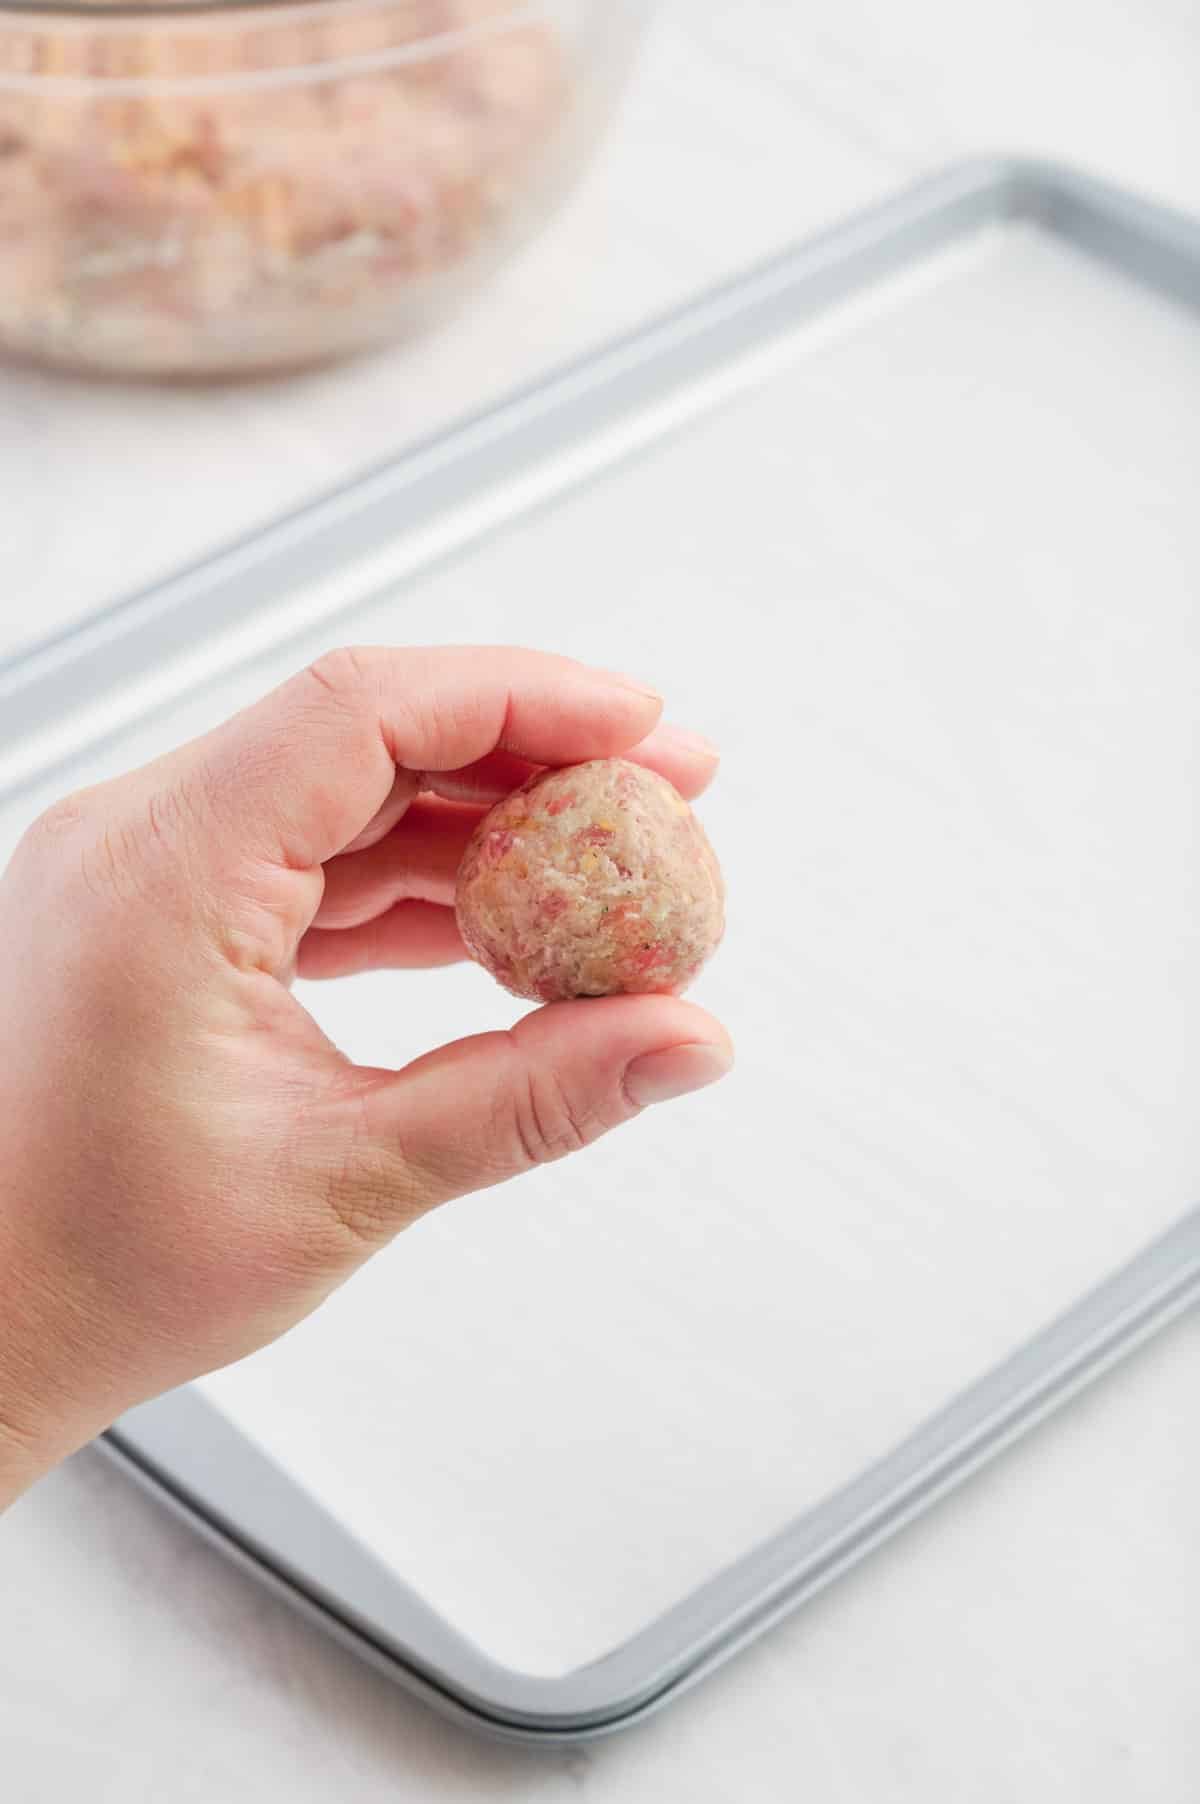 A hand rolls the sausage mixture into a ball.